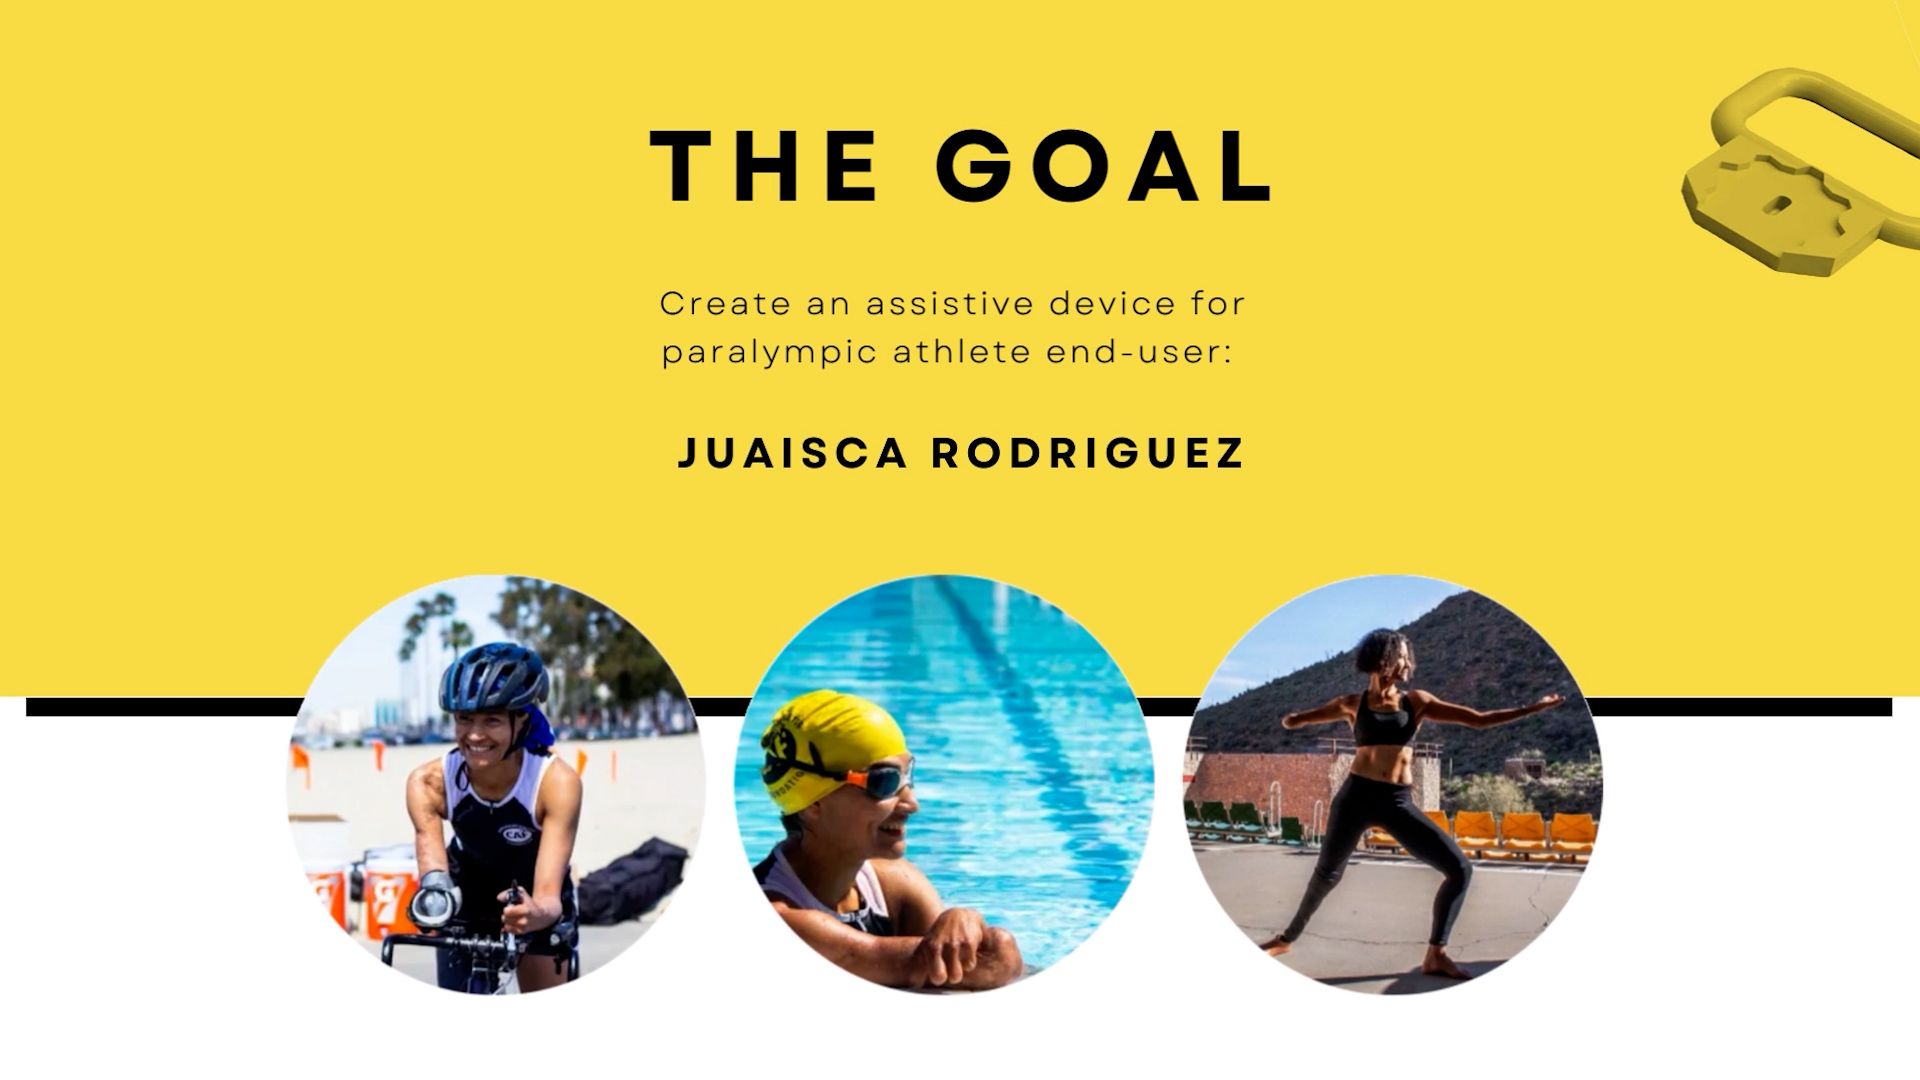 A slideshow image highlighting the goal of creating an assistive device for paralympic athlete Juaisca Rodriguez.